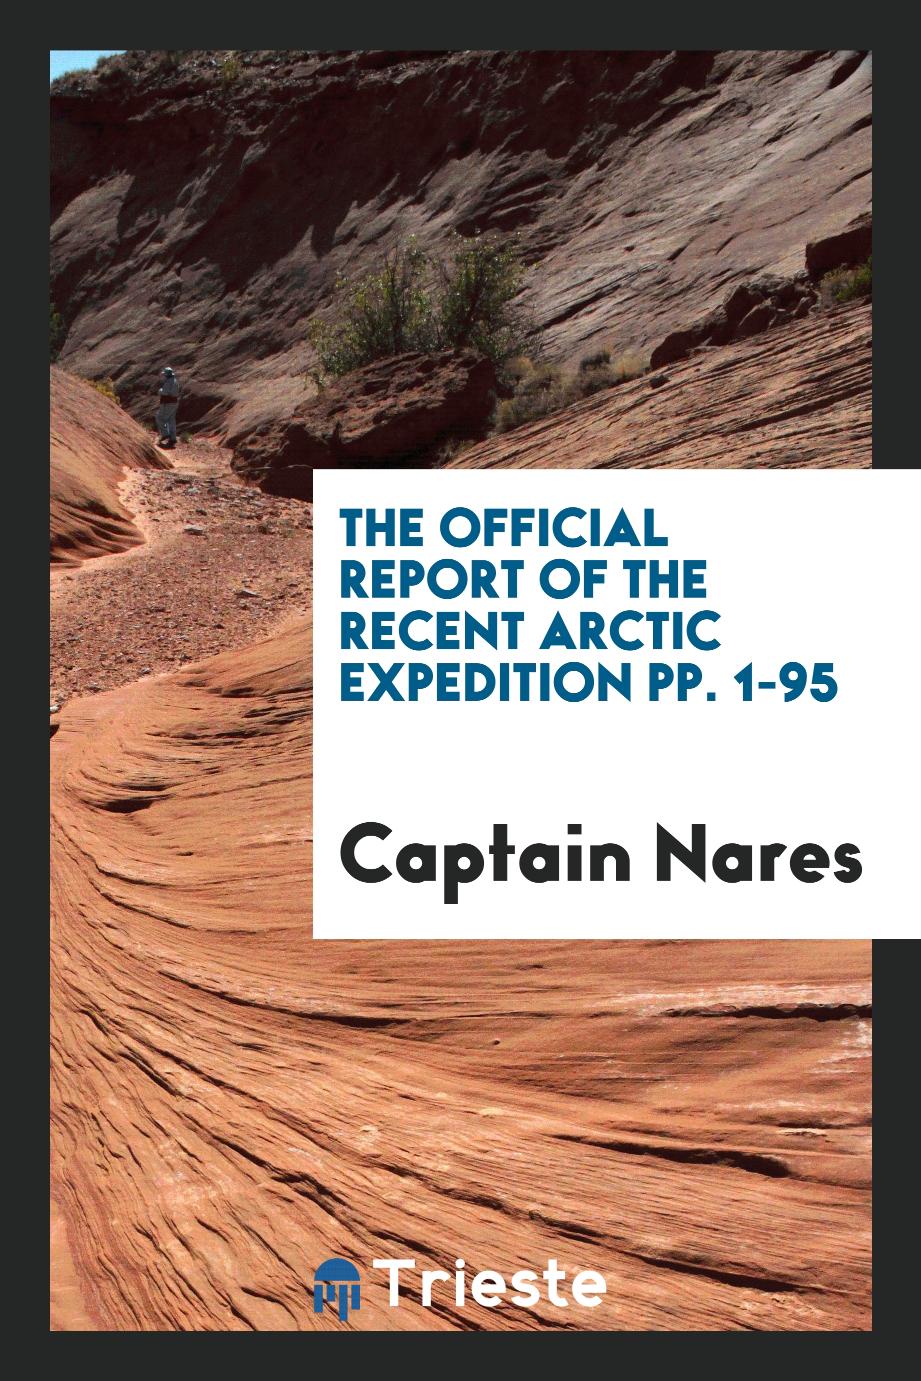 The Official Report of the Recent Arctic Expedition pp. 1-95